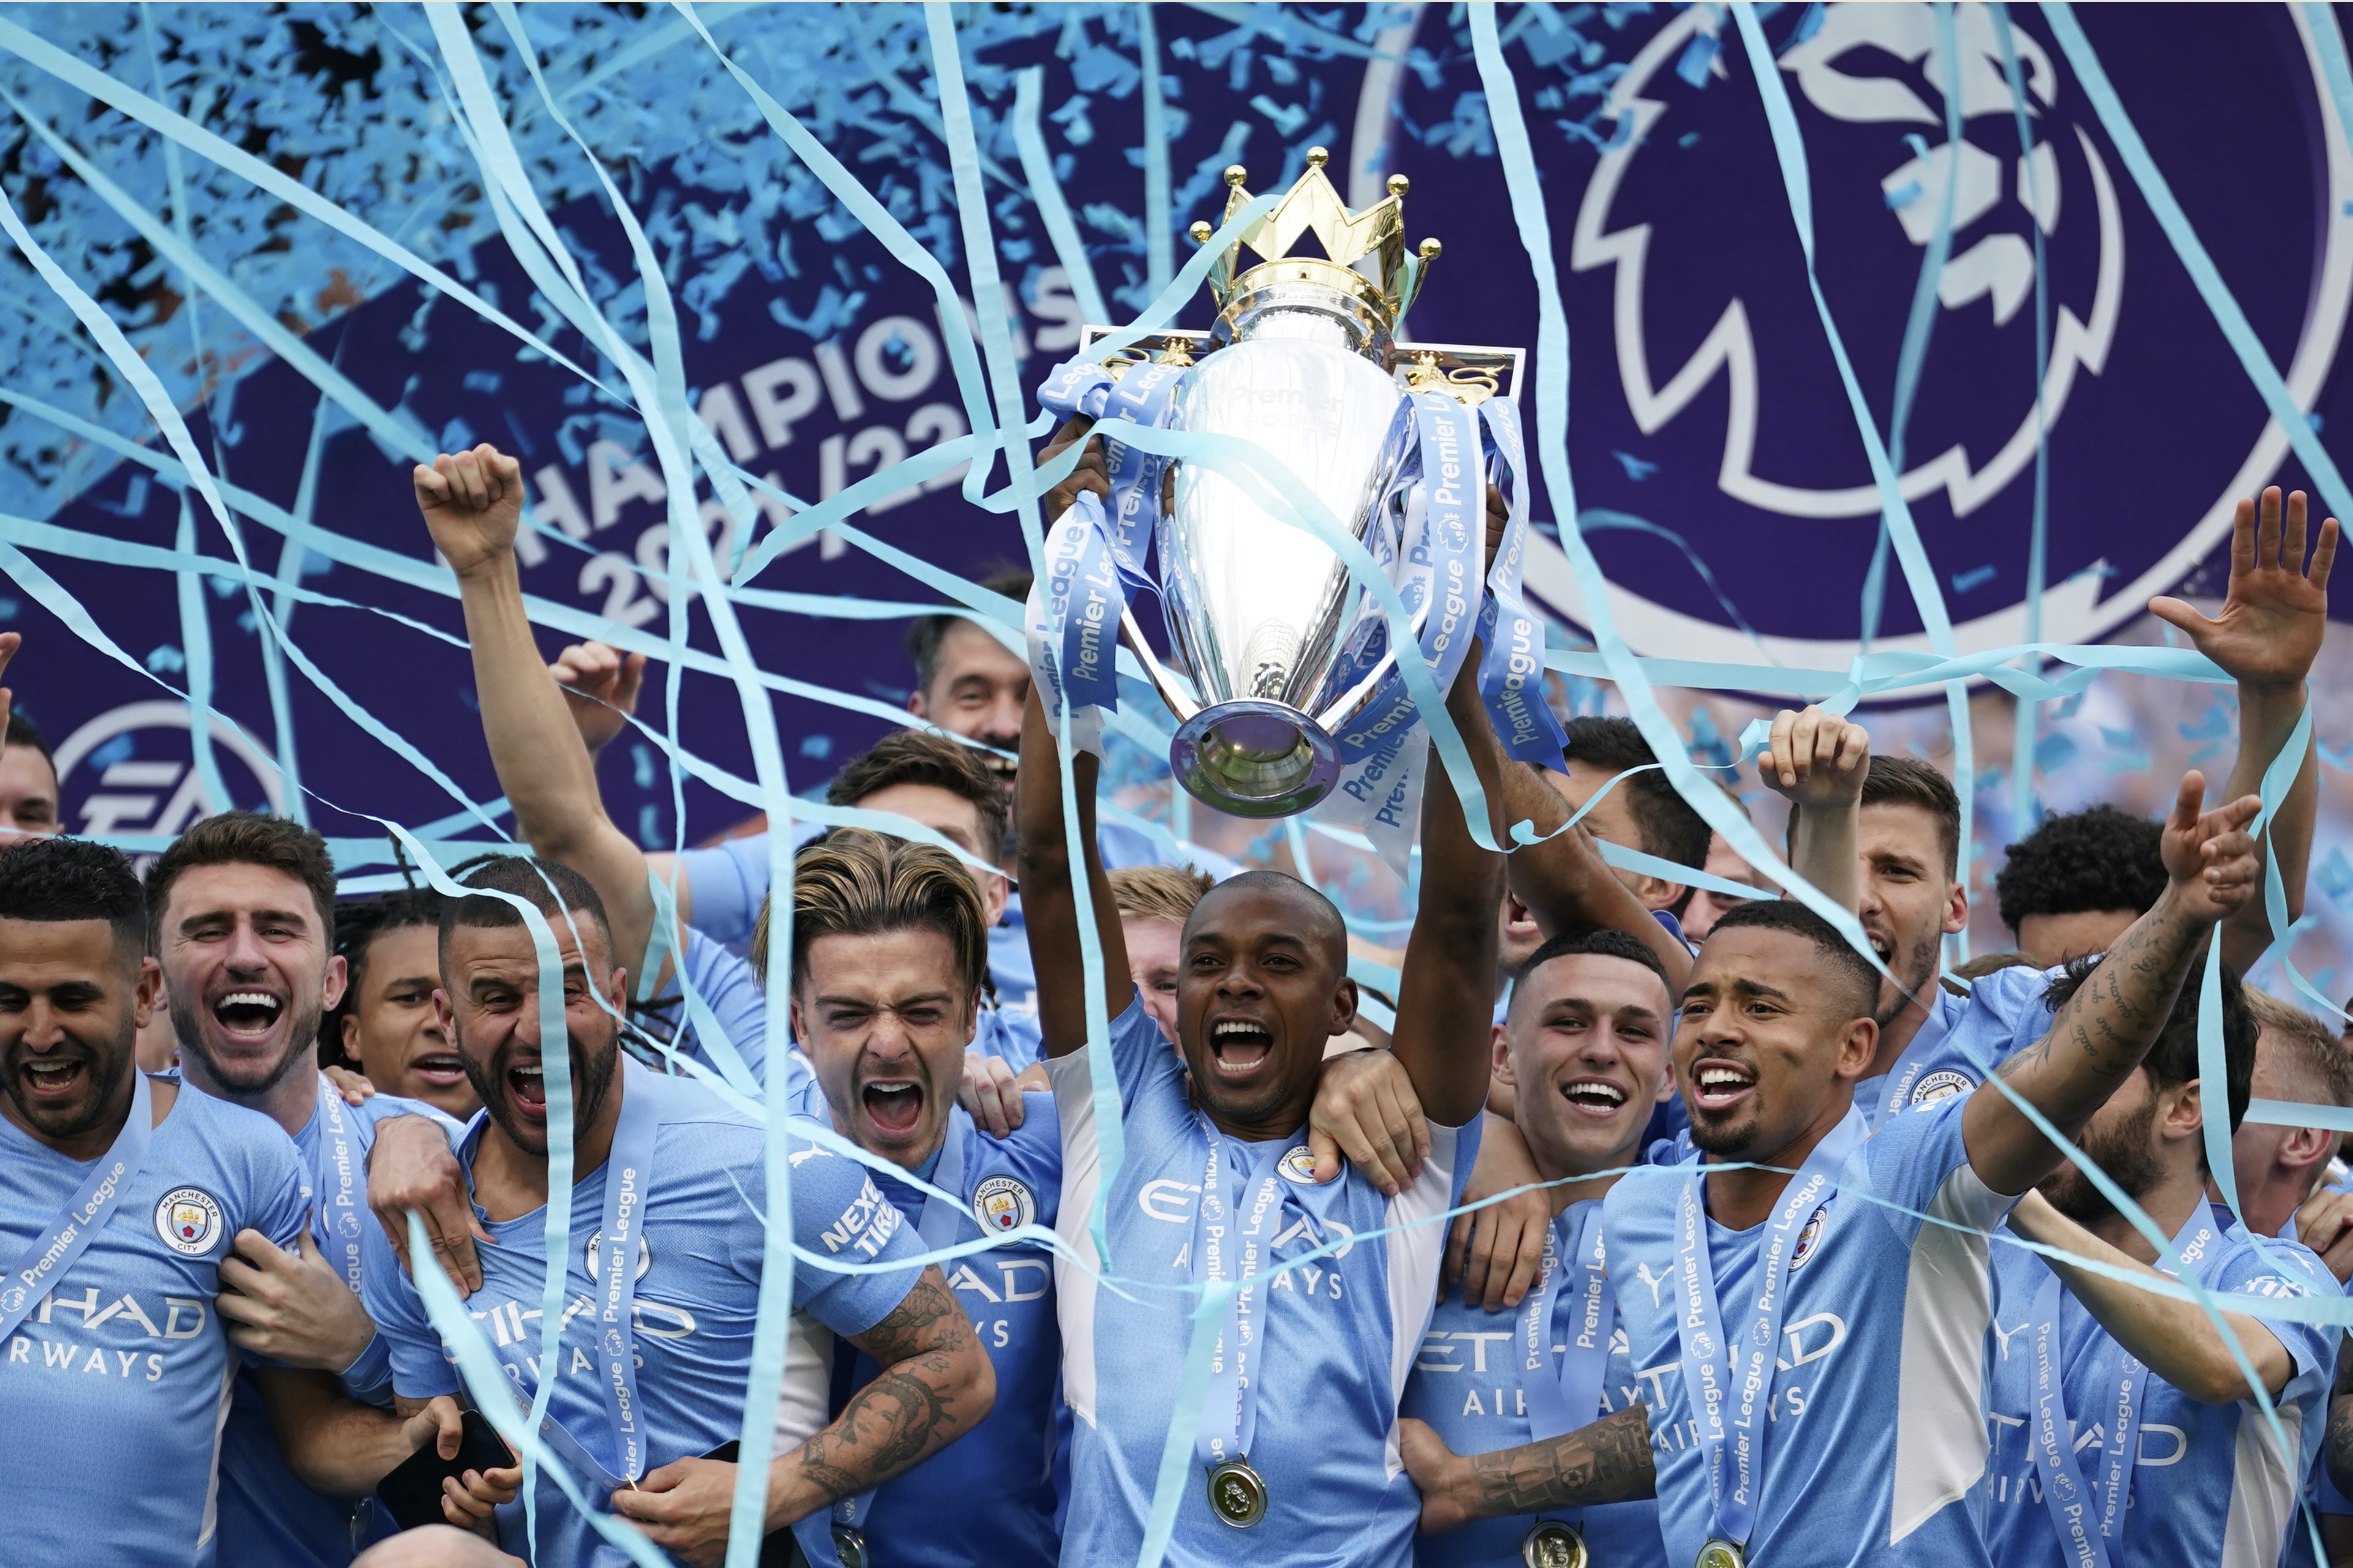 Goals In 5 Minute Recovery Wins Premier League For City